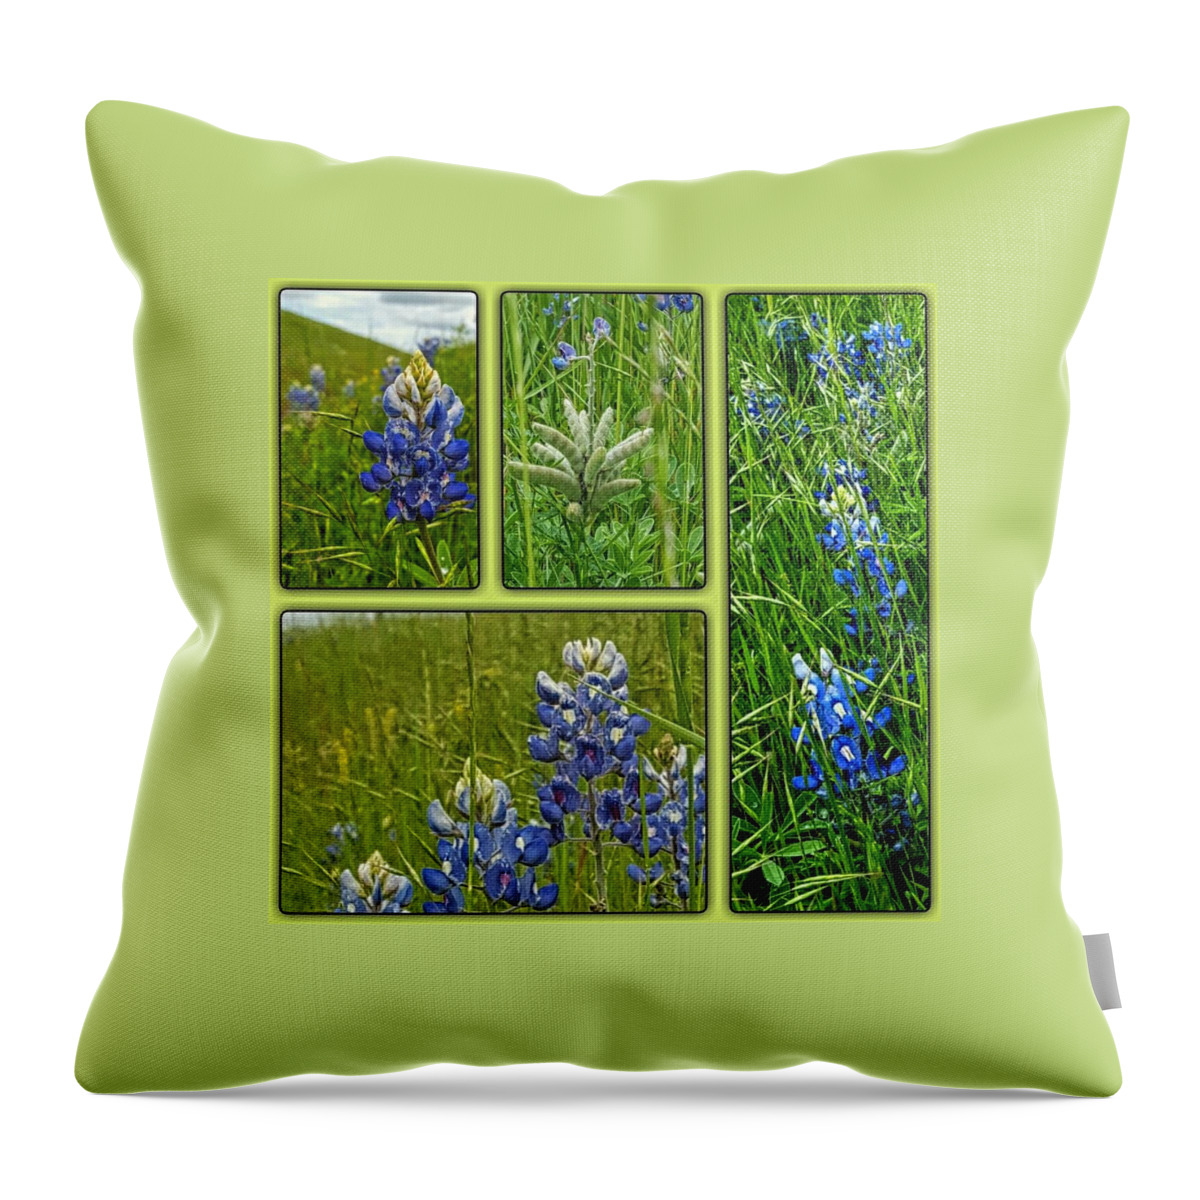 State Flower Of Texas Throw Pillow featuring the digital art Blue Lupines Are Texan Bluebonnets by Pamela Smale Williams